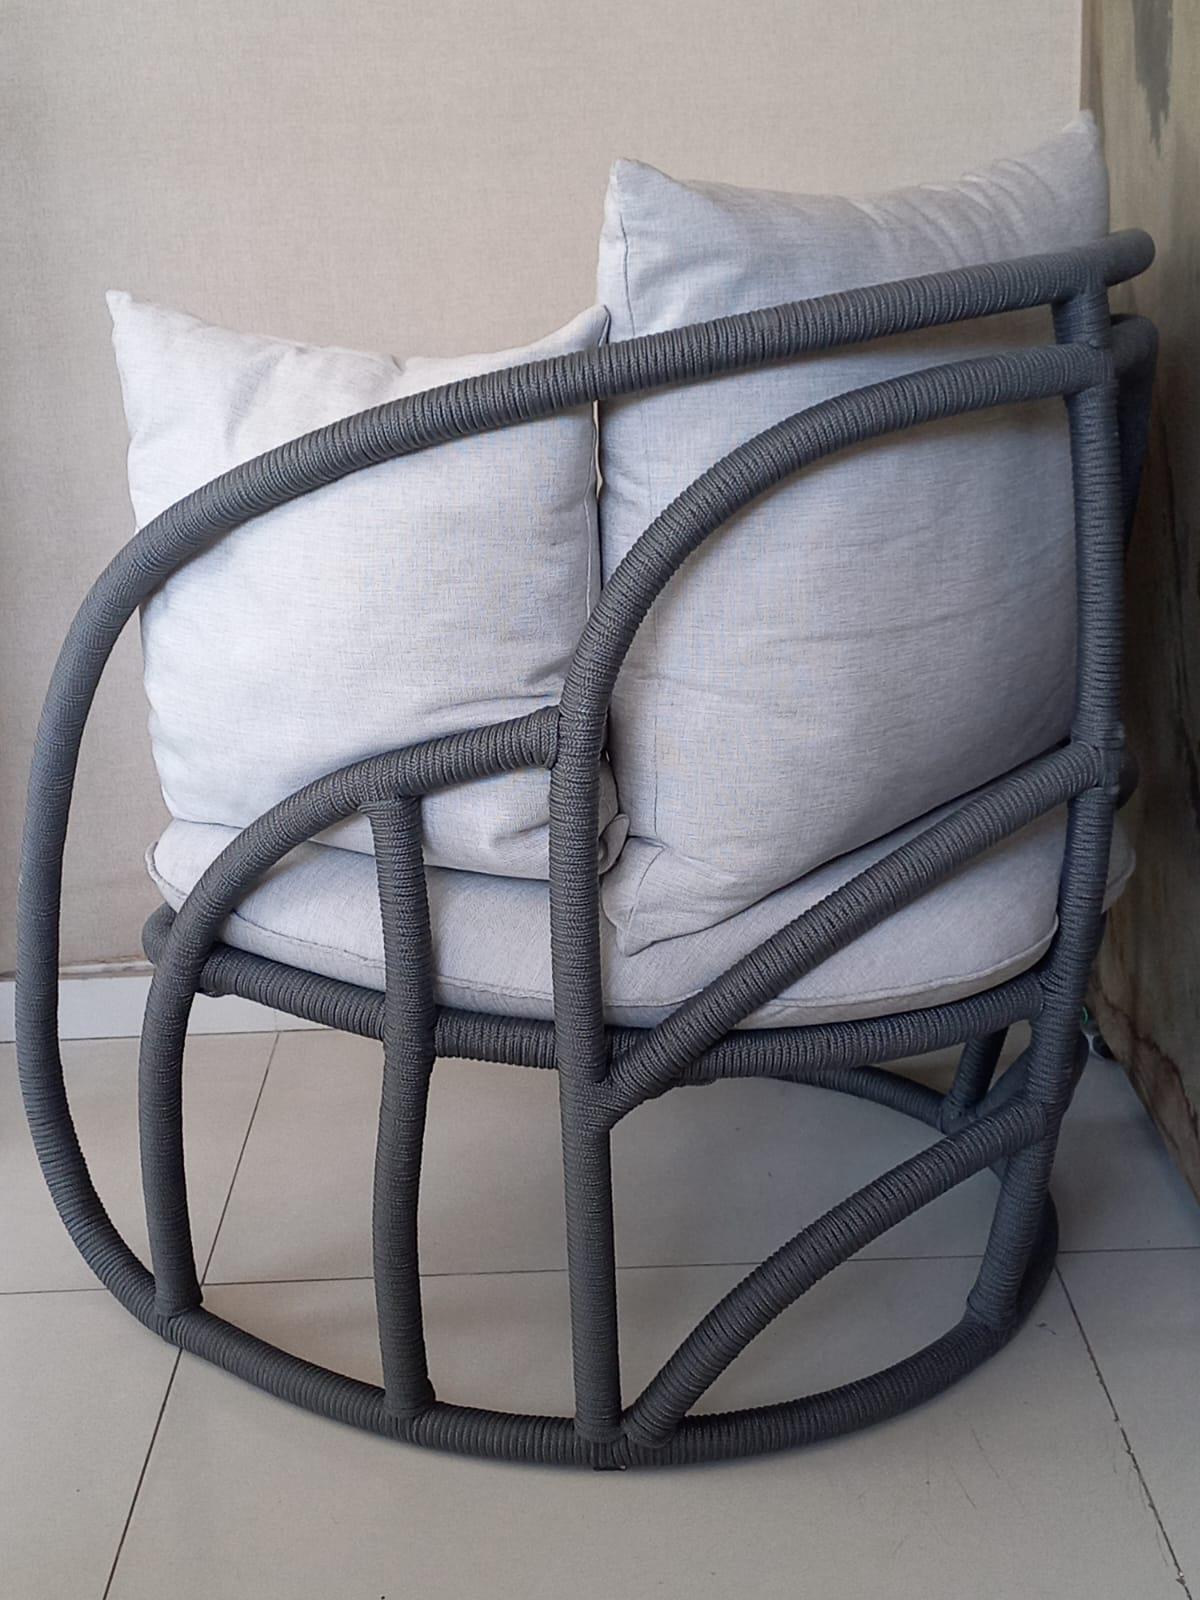 Raízes Armchair - In gray In New Condition For Sale In Campina Grande, Paraiba